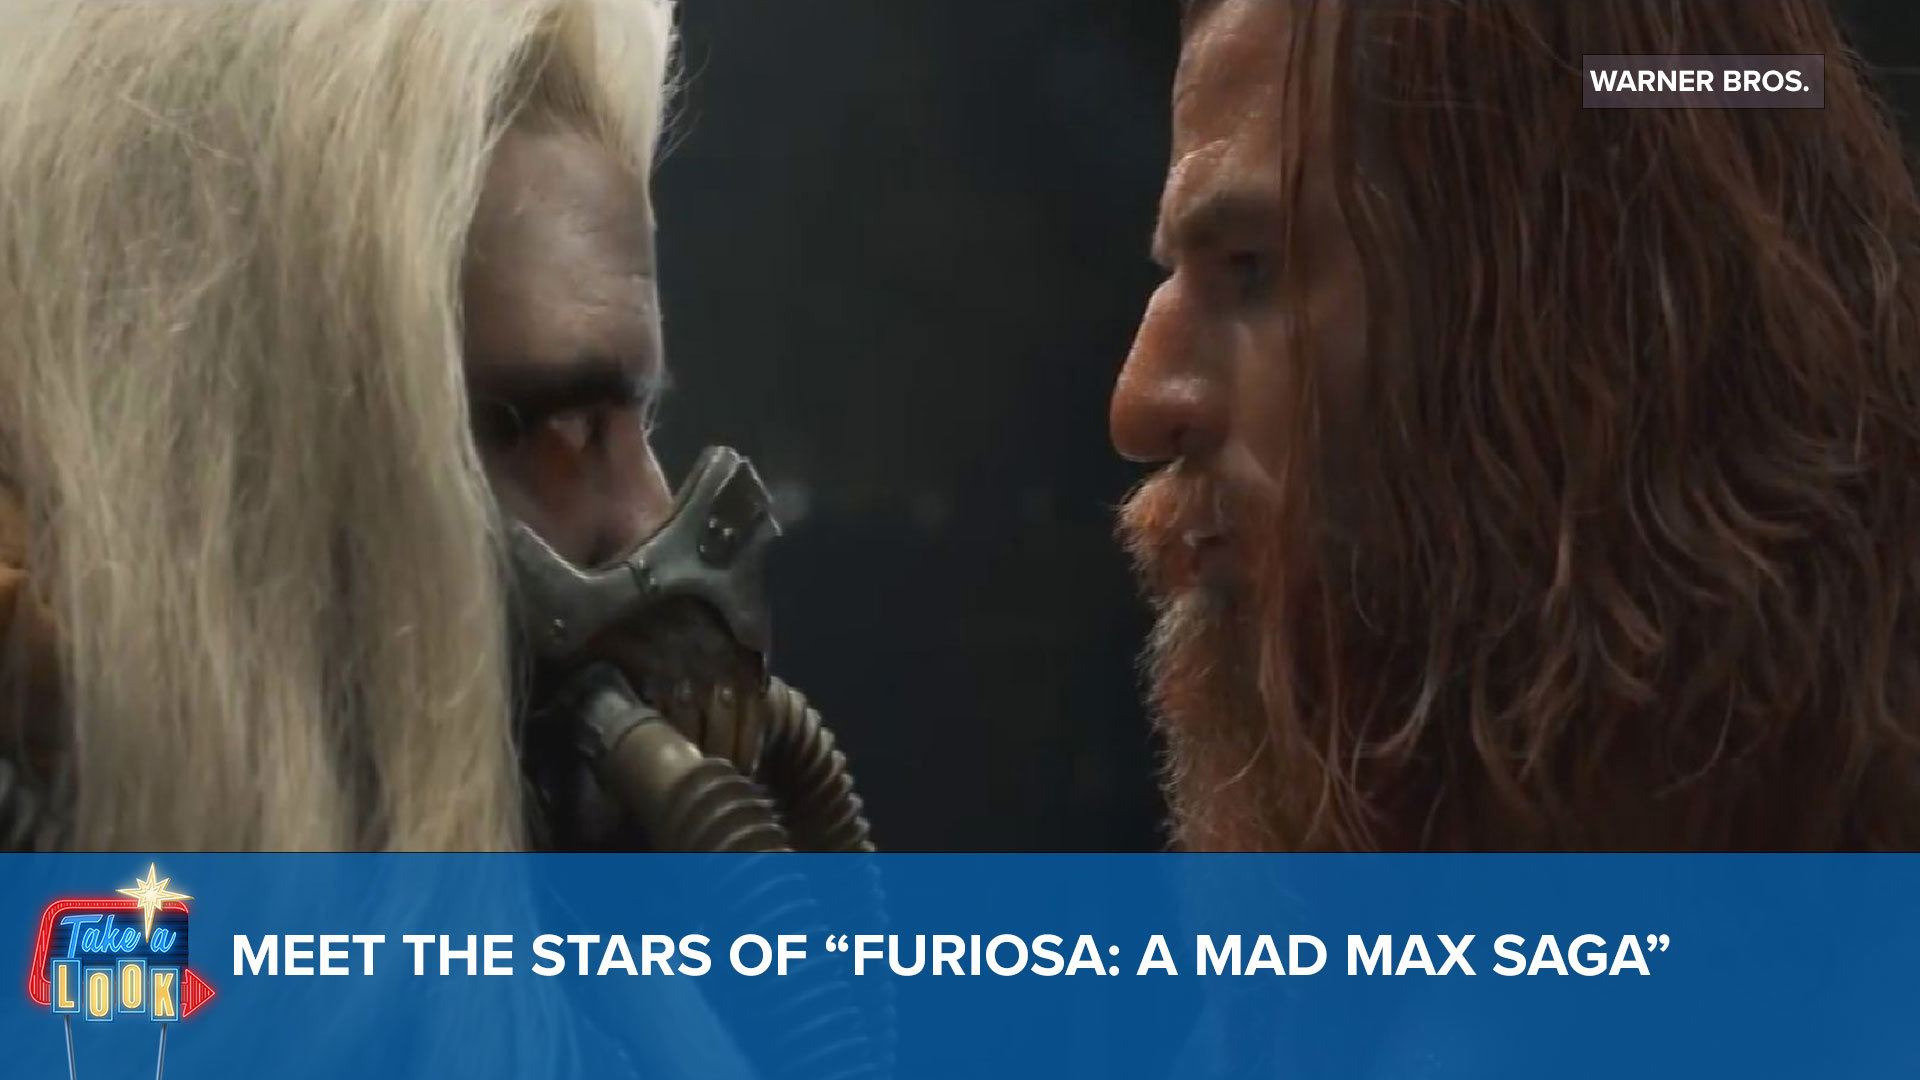 This week on “Take a Look” with Mark S. Allen: We talk with the stars of “Furiosa: A Mad Max Saga.”